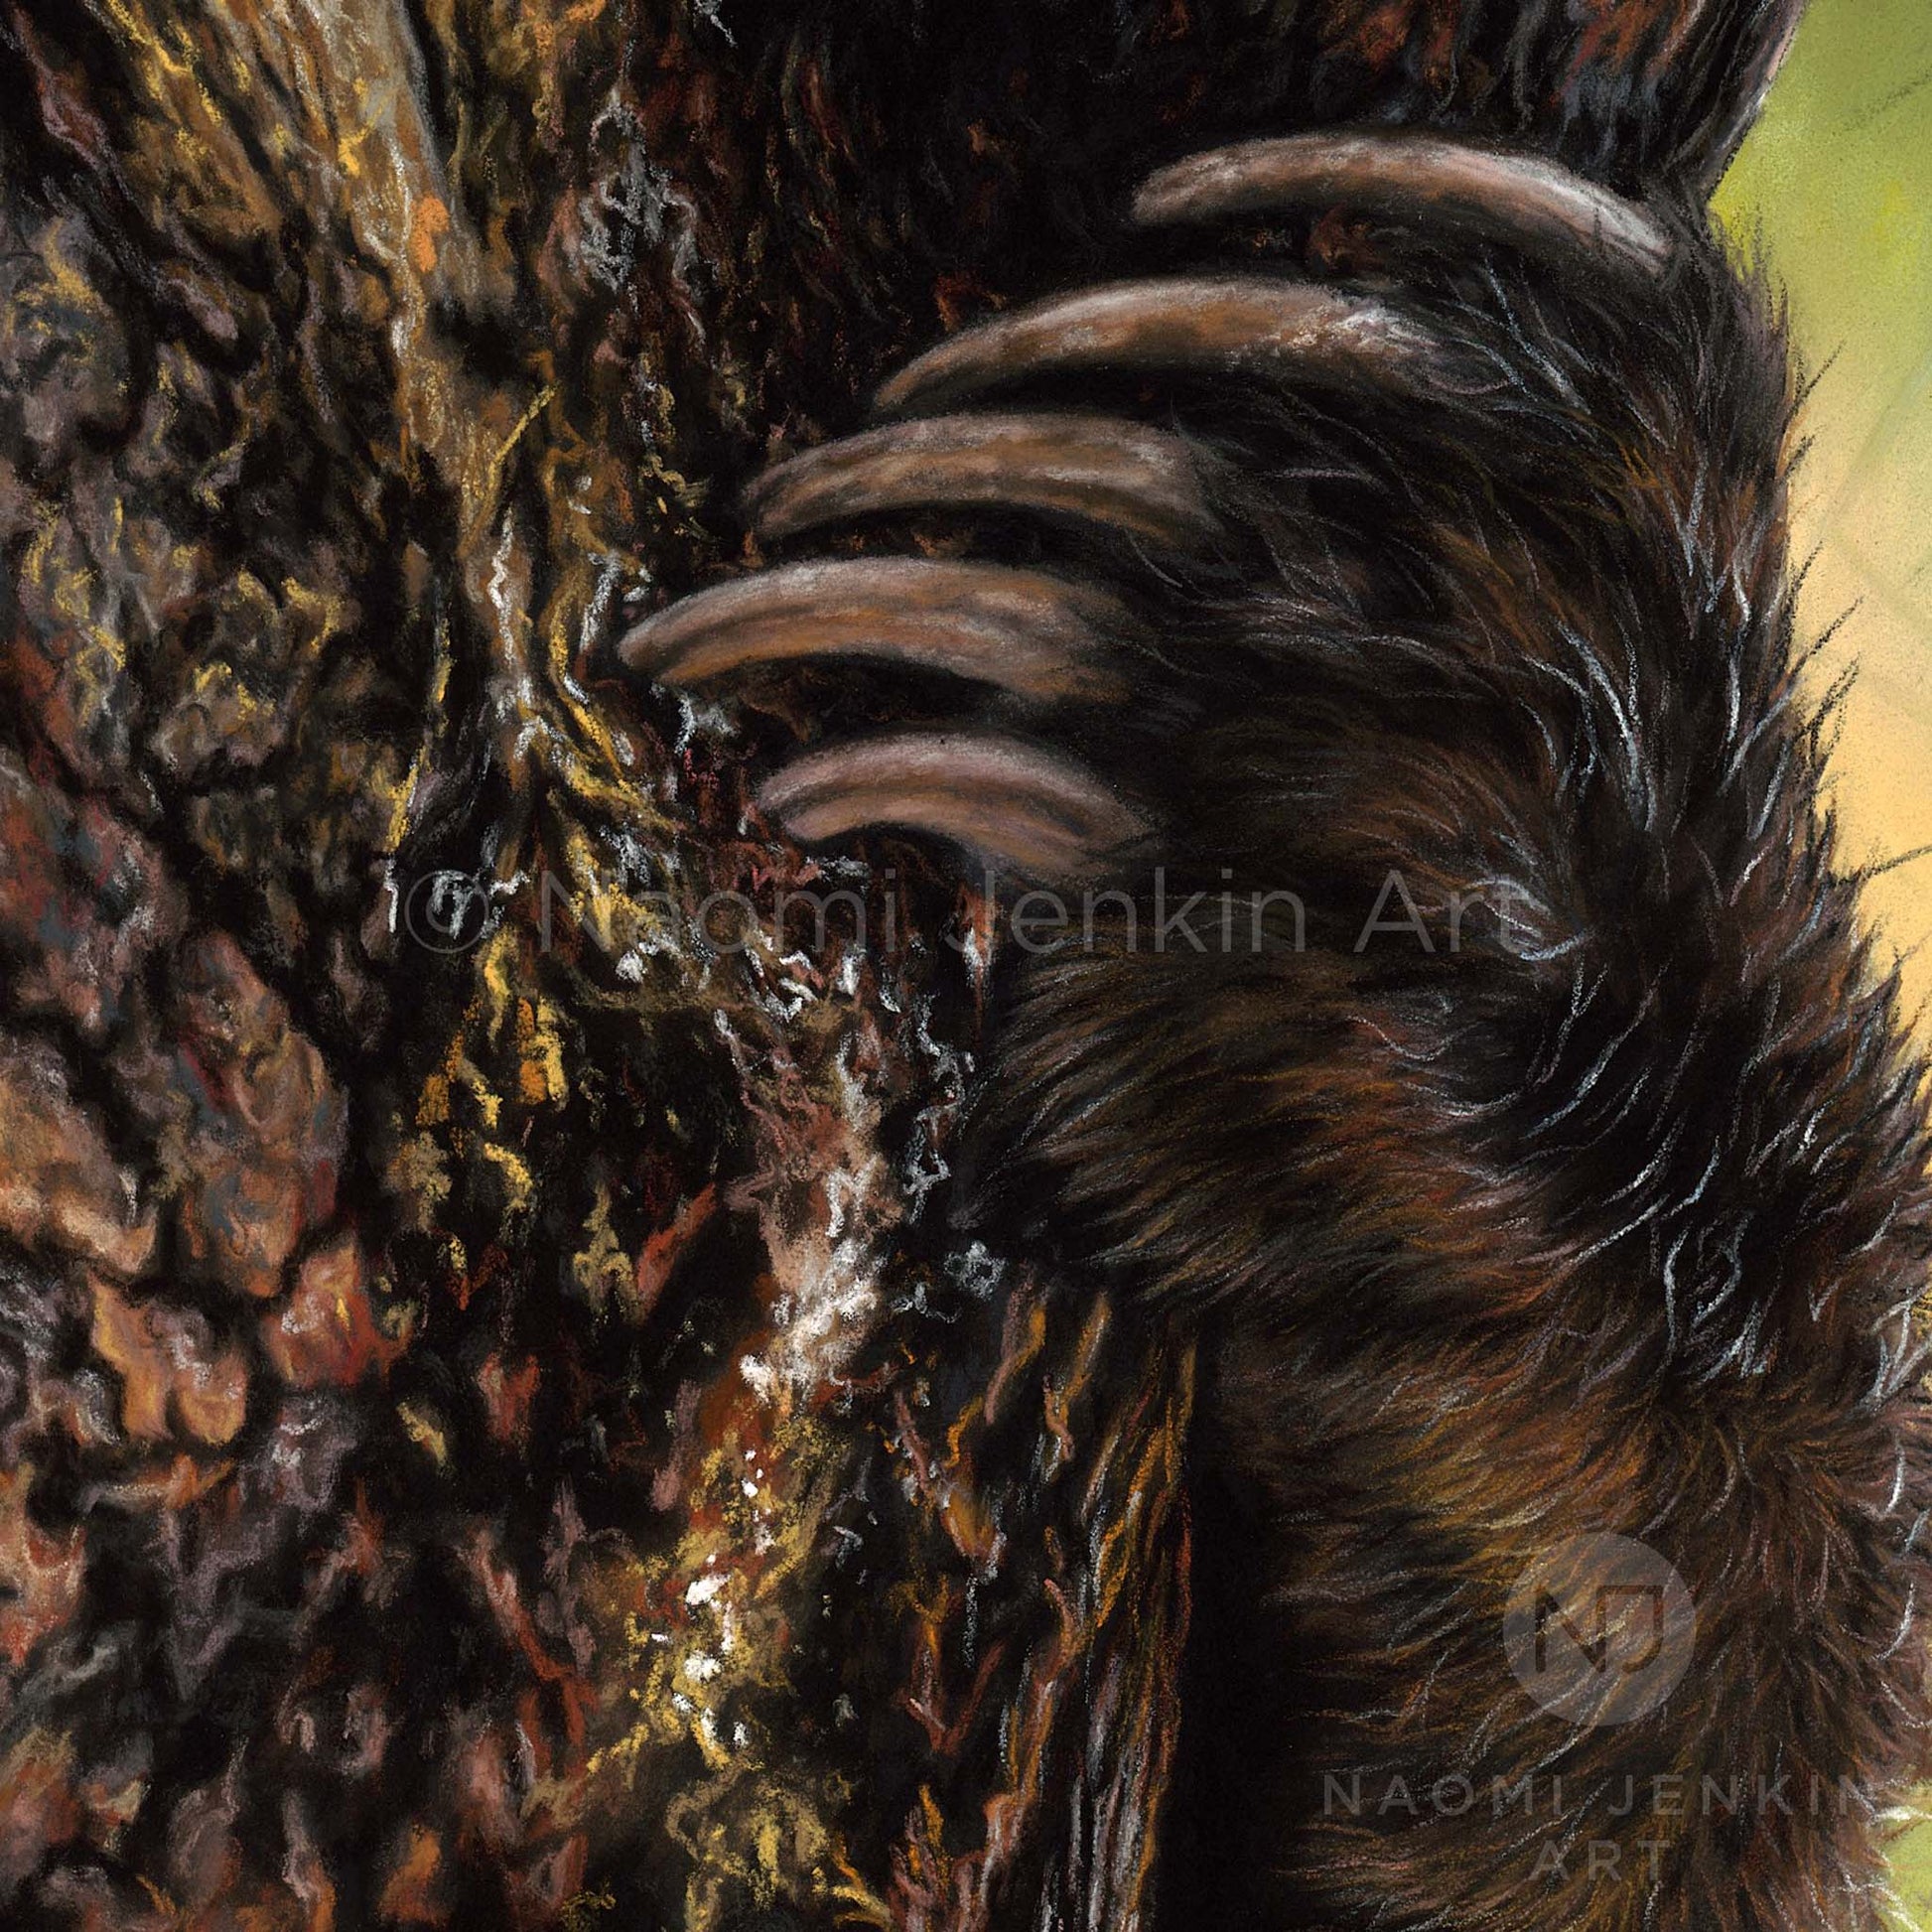 Close up of a wildlife art drawing of a grizzly bear by Naomi Jenkin Art. 